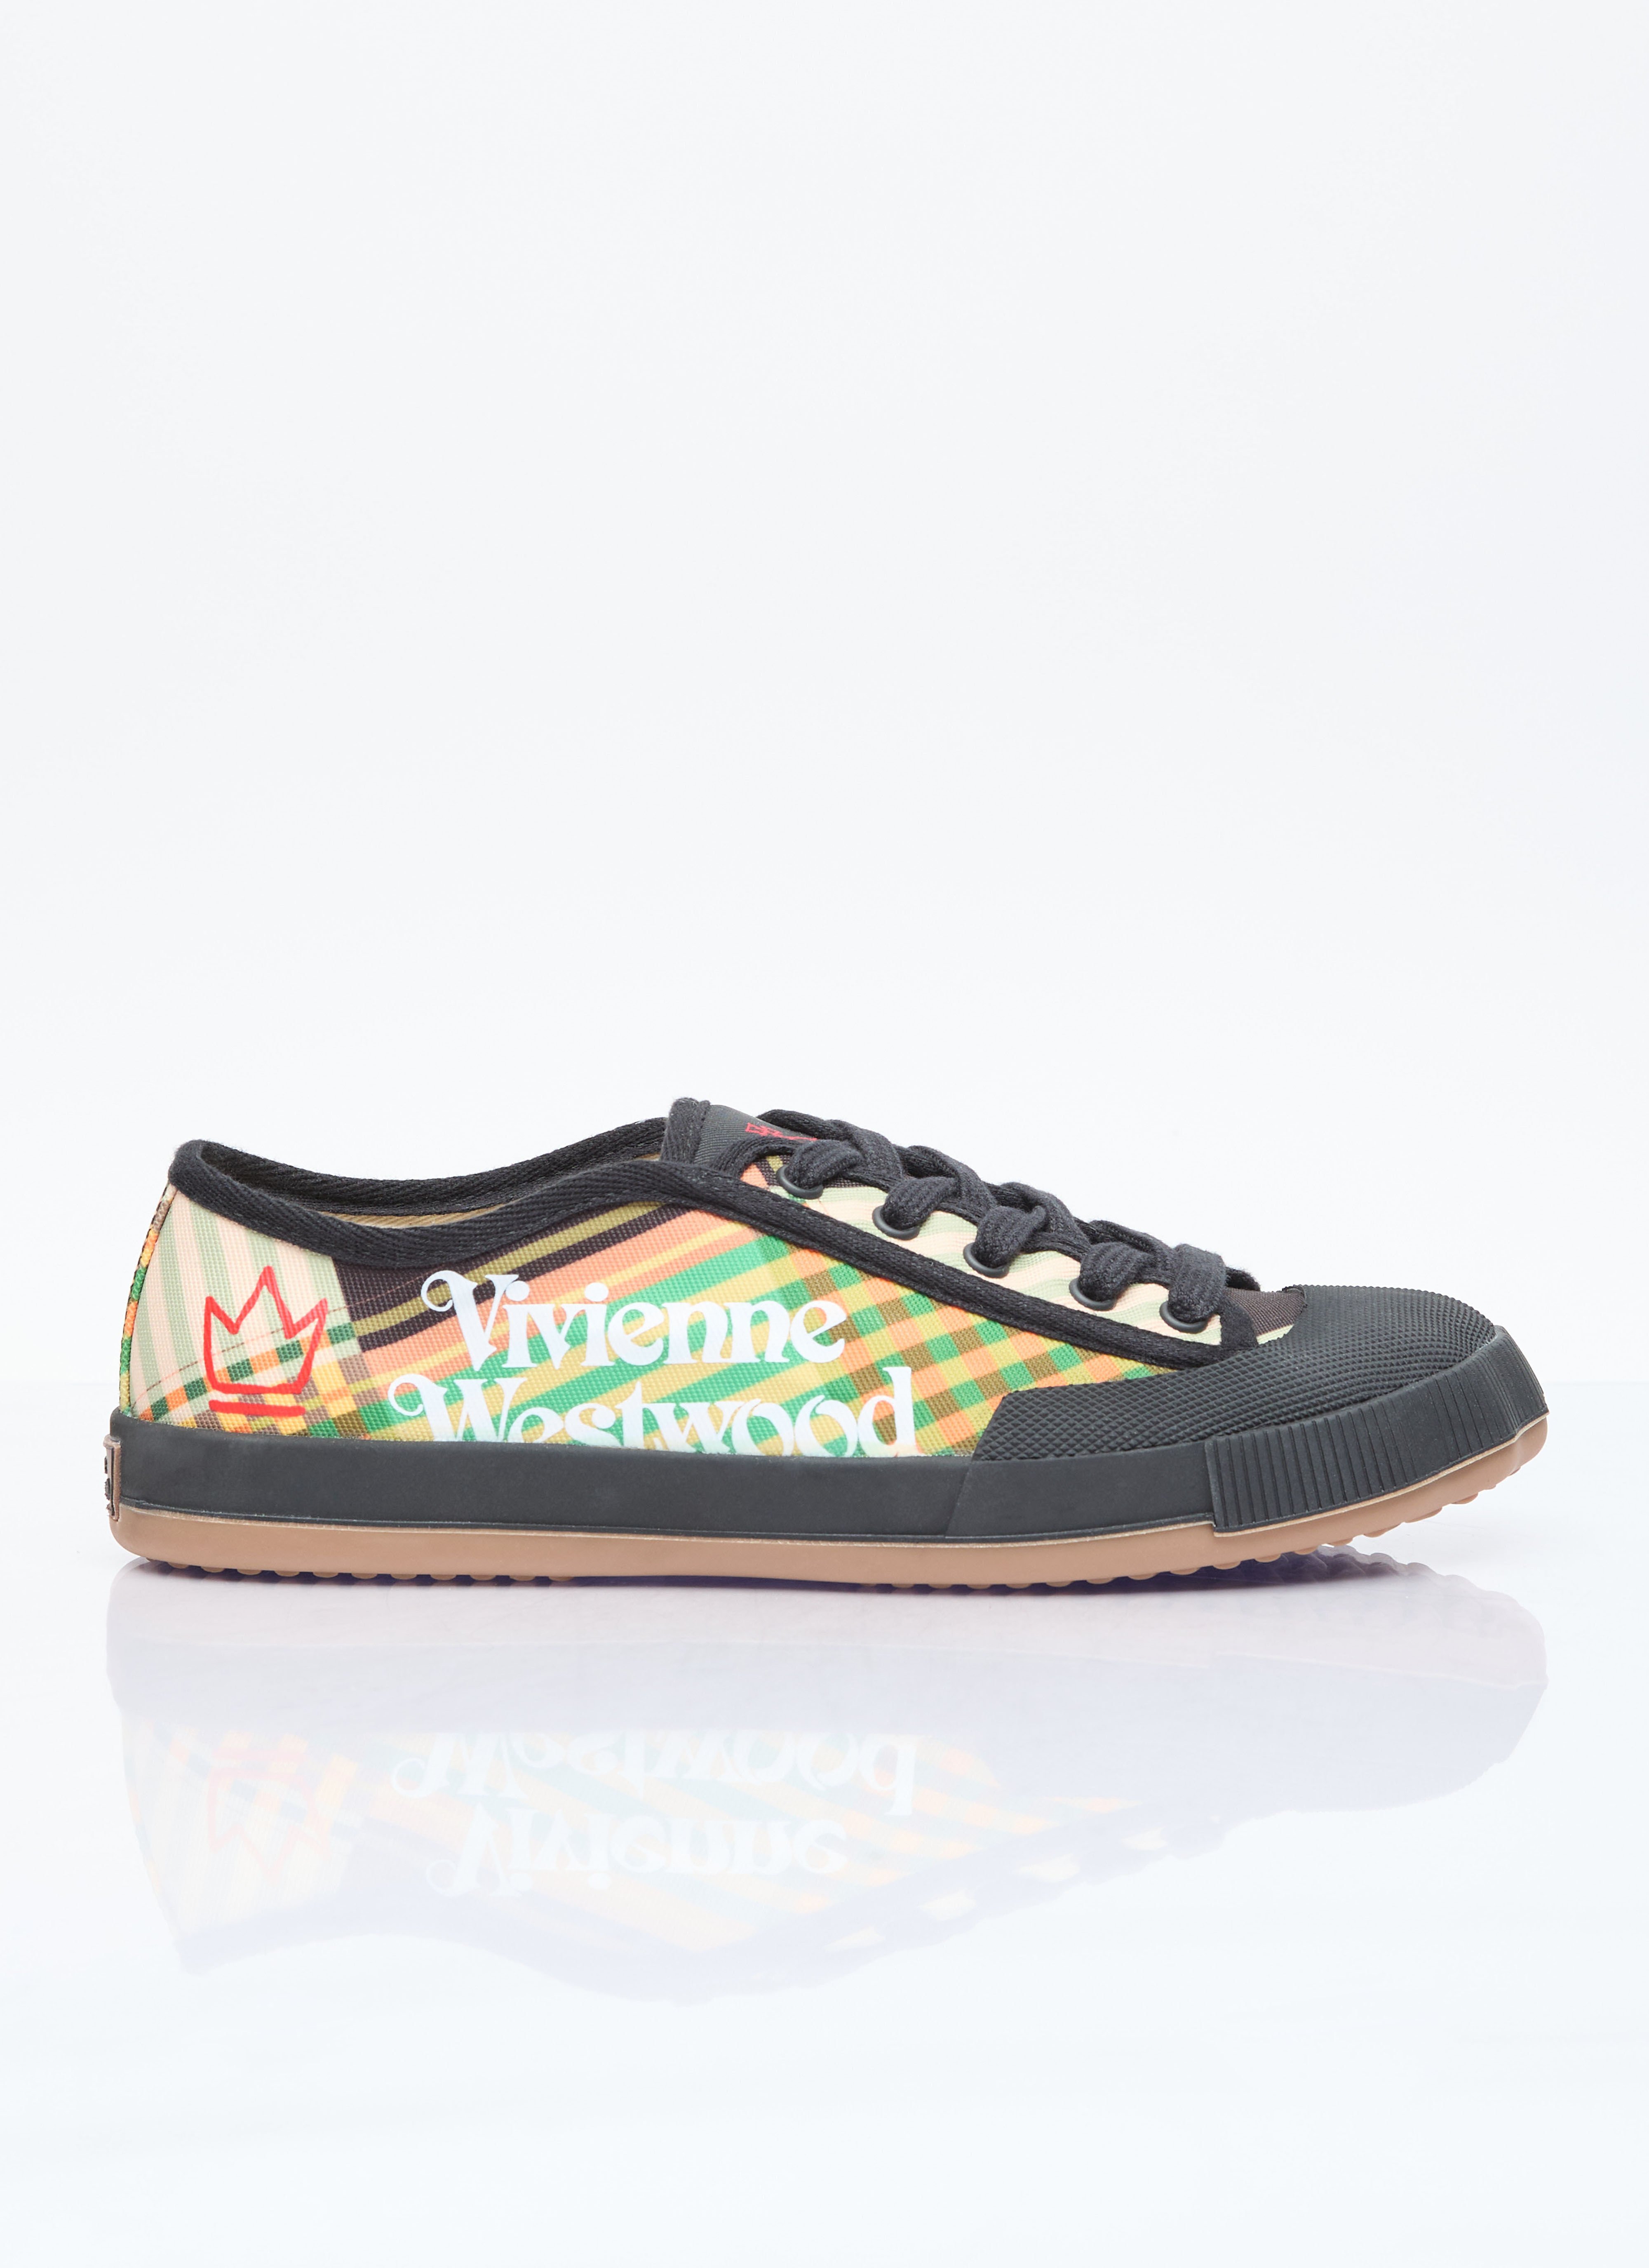 Dolce & Gabbana Animal Gym Low Top Sneakers Multicolour dol0255023